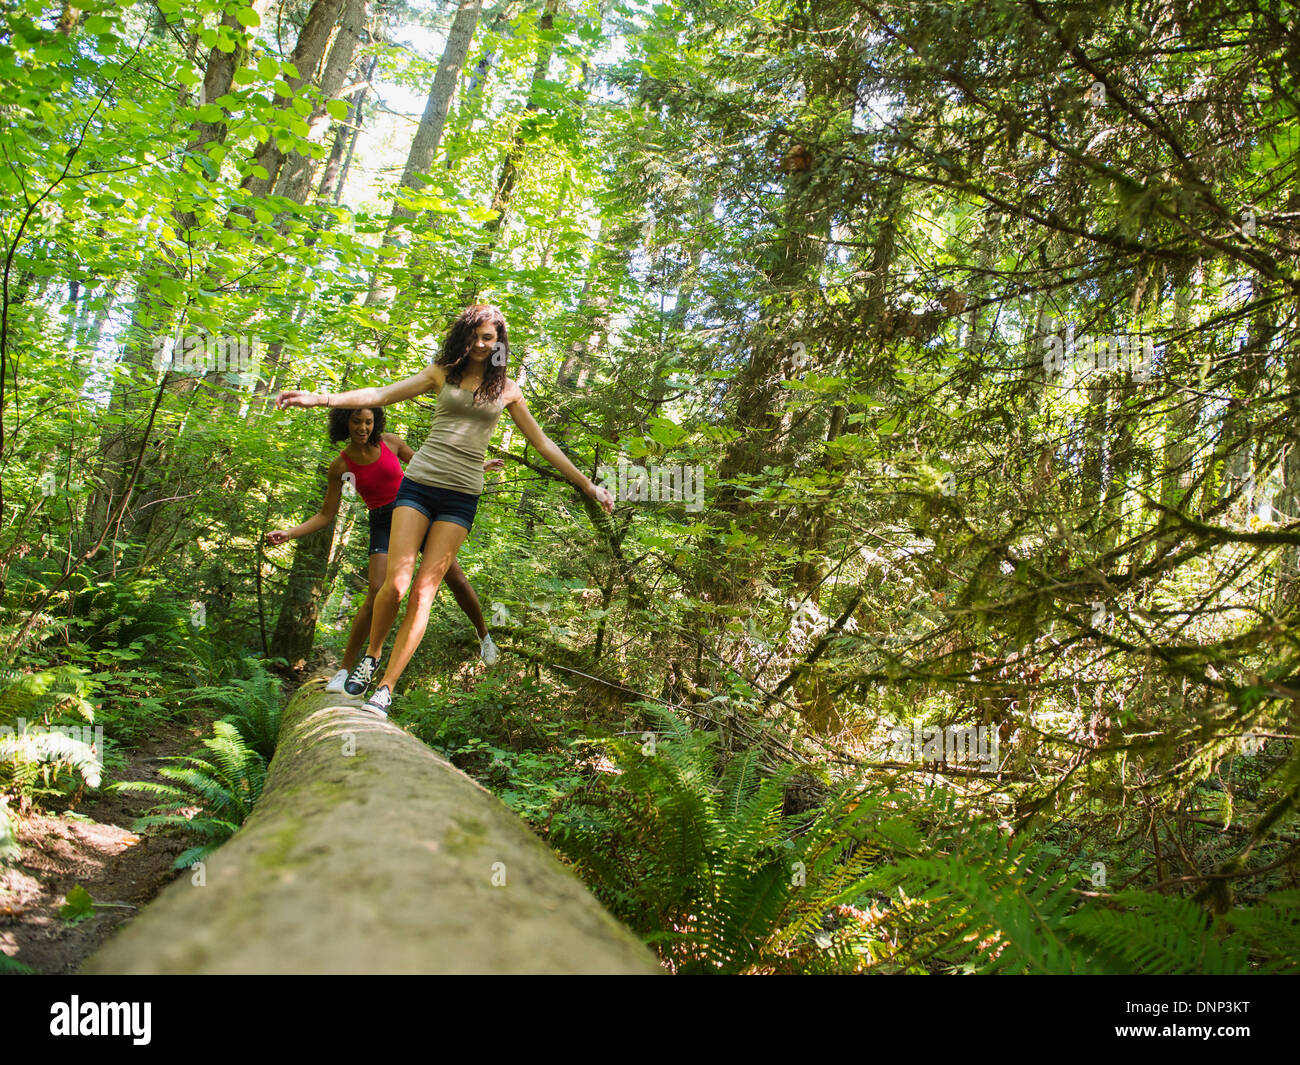 USA, Oregon, Portland, Two young women walking on log in forest Stock Photo